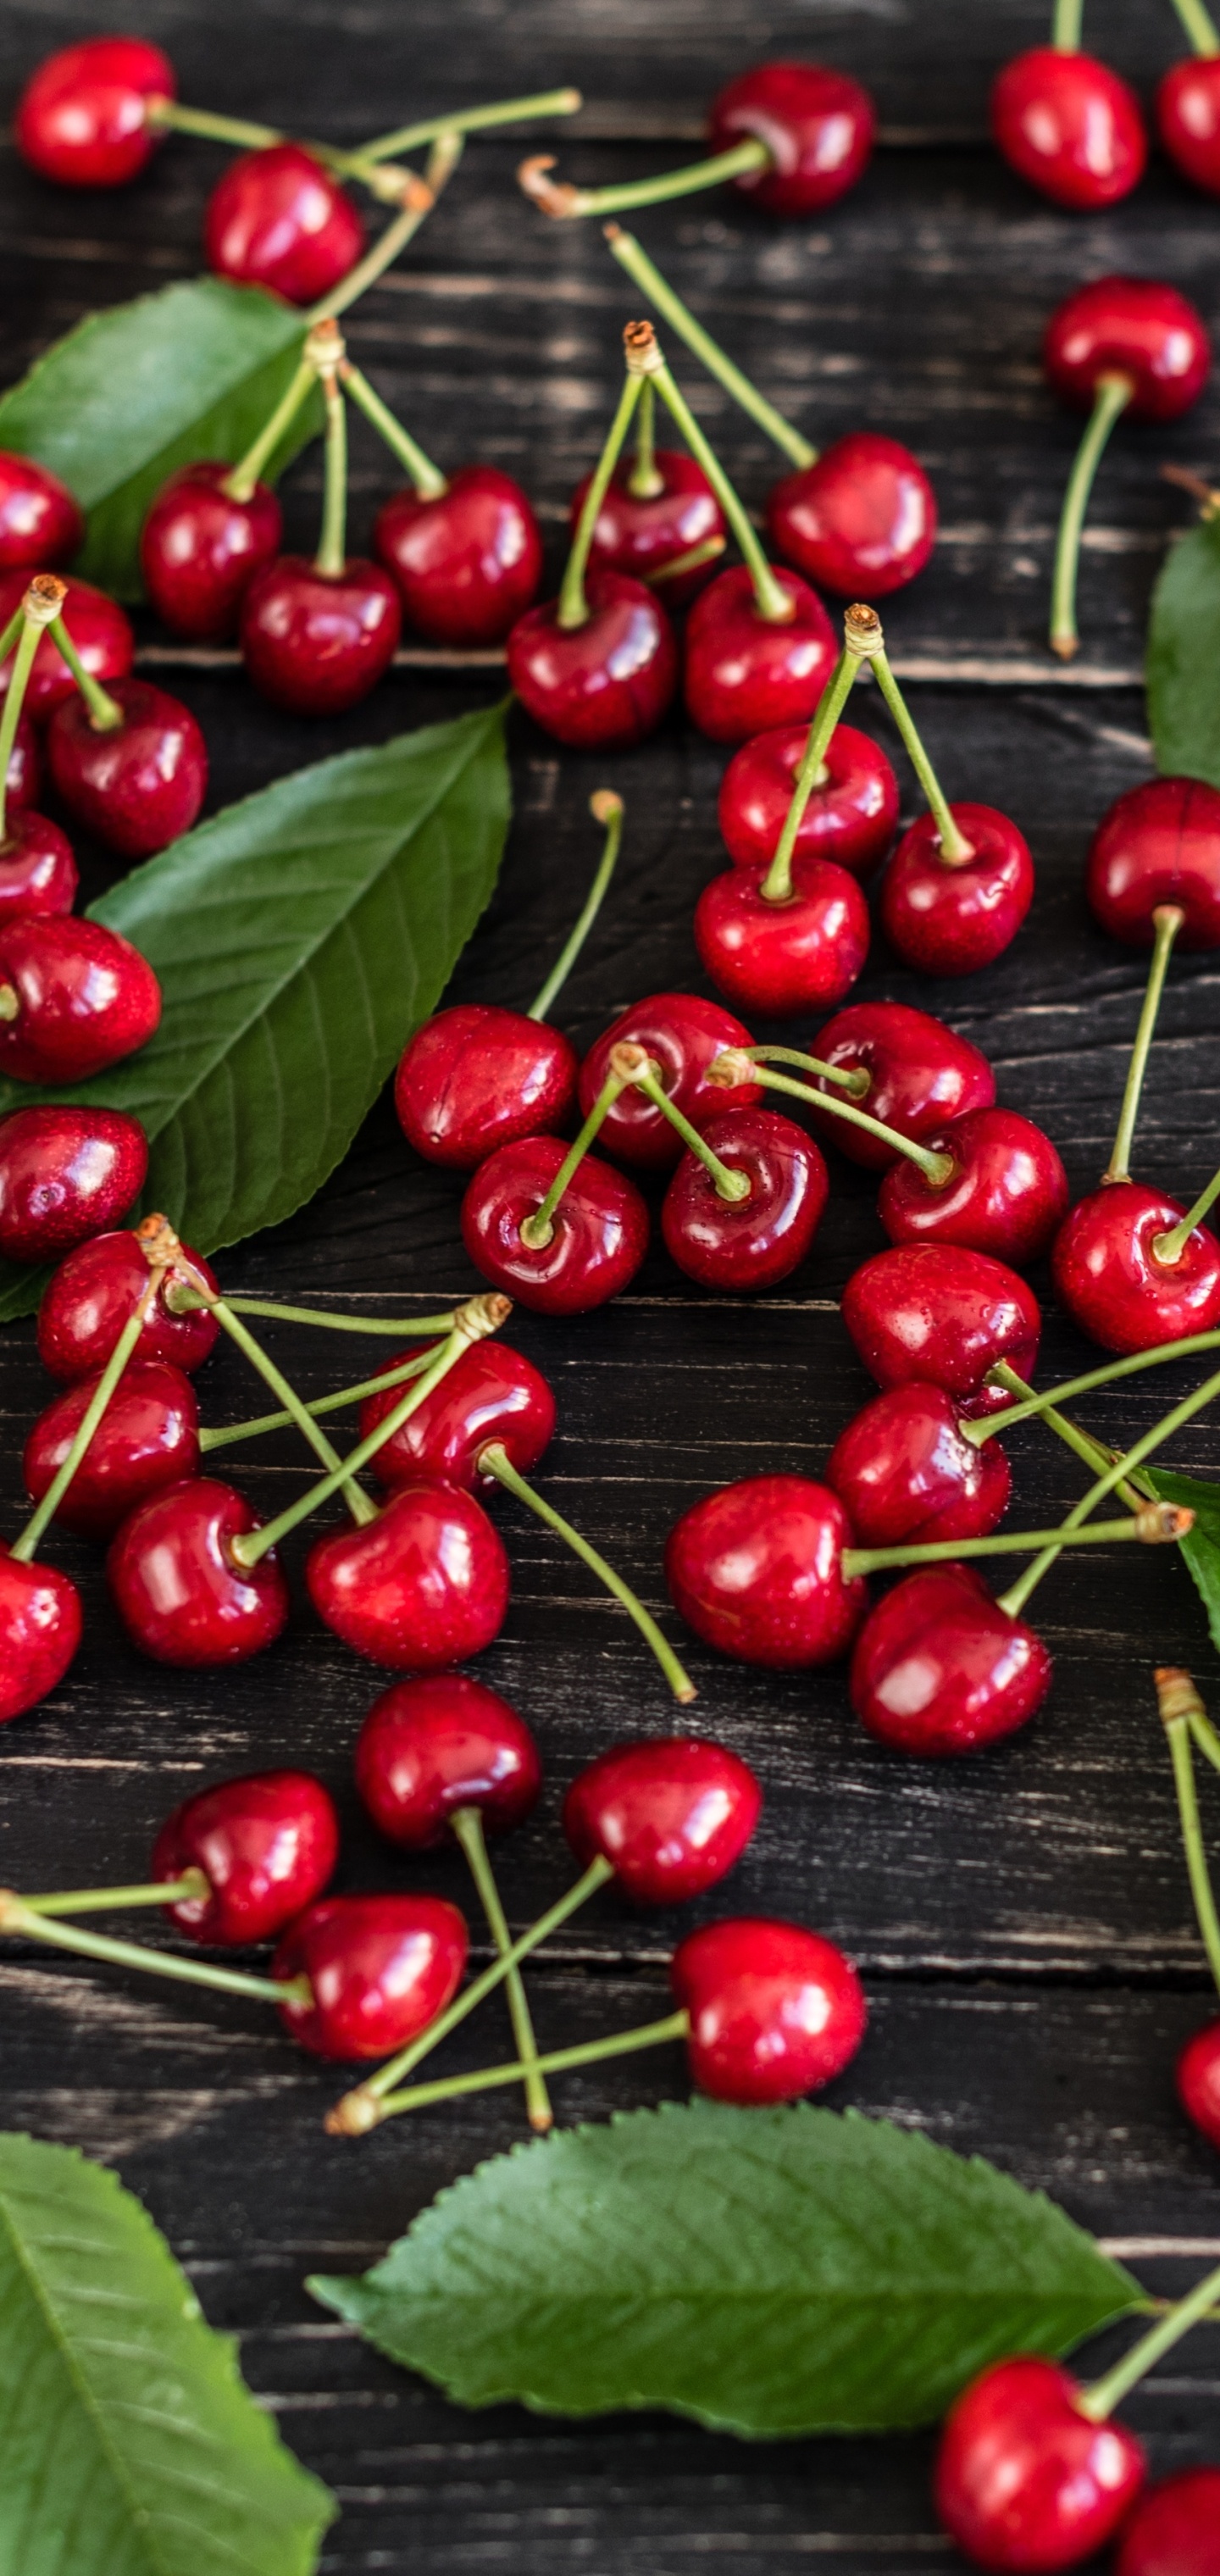 Cherry: Available for a short season in the mid-spring through the summer. 1440x3040 HD Wallpaper.